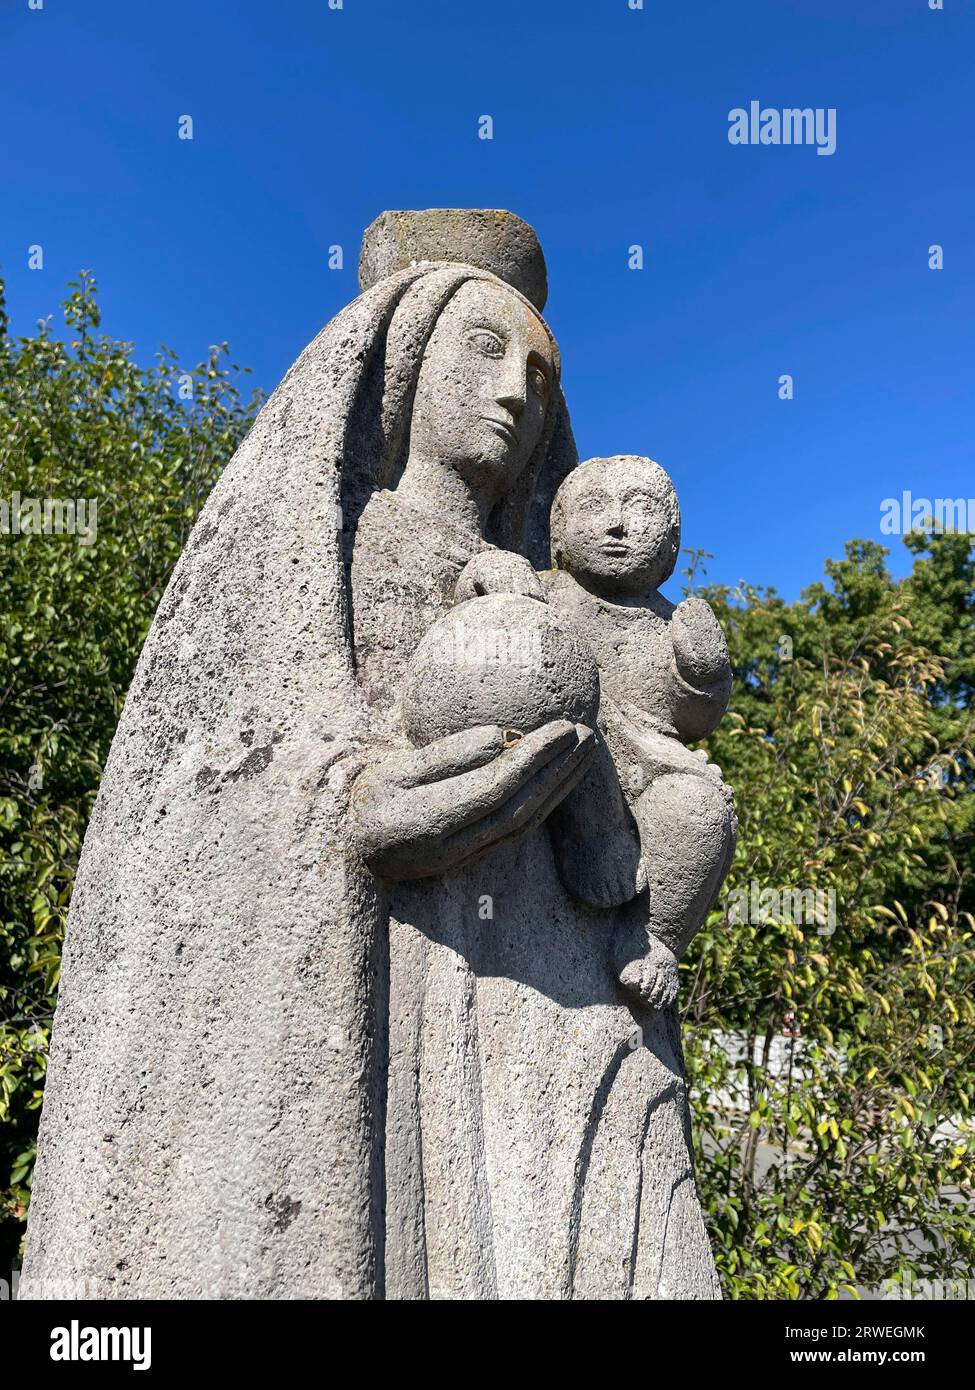 Madonna sculpture, Catholicism, Romantic Road, Tauber Valley Cycle Route, Main-Tauber Valley Way of St. James, Tauber Valley, Tauberfranken Stock Photo